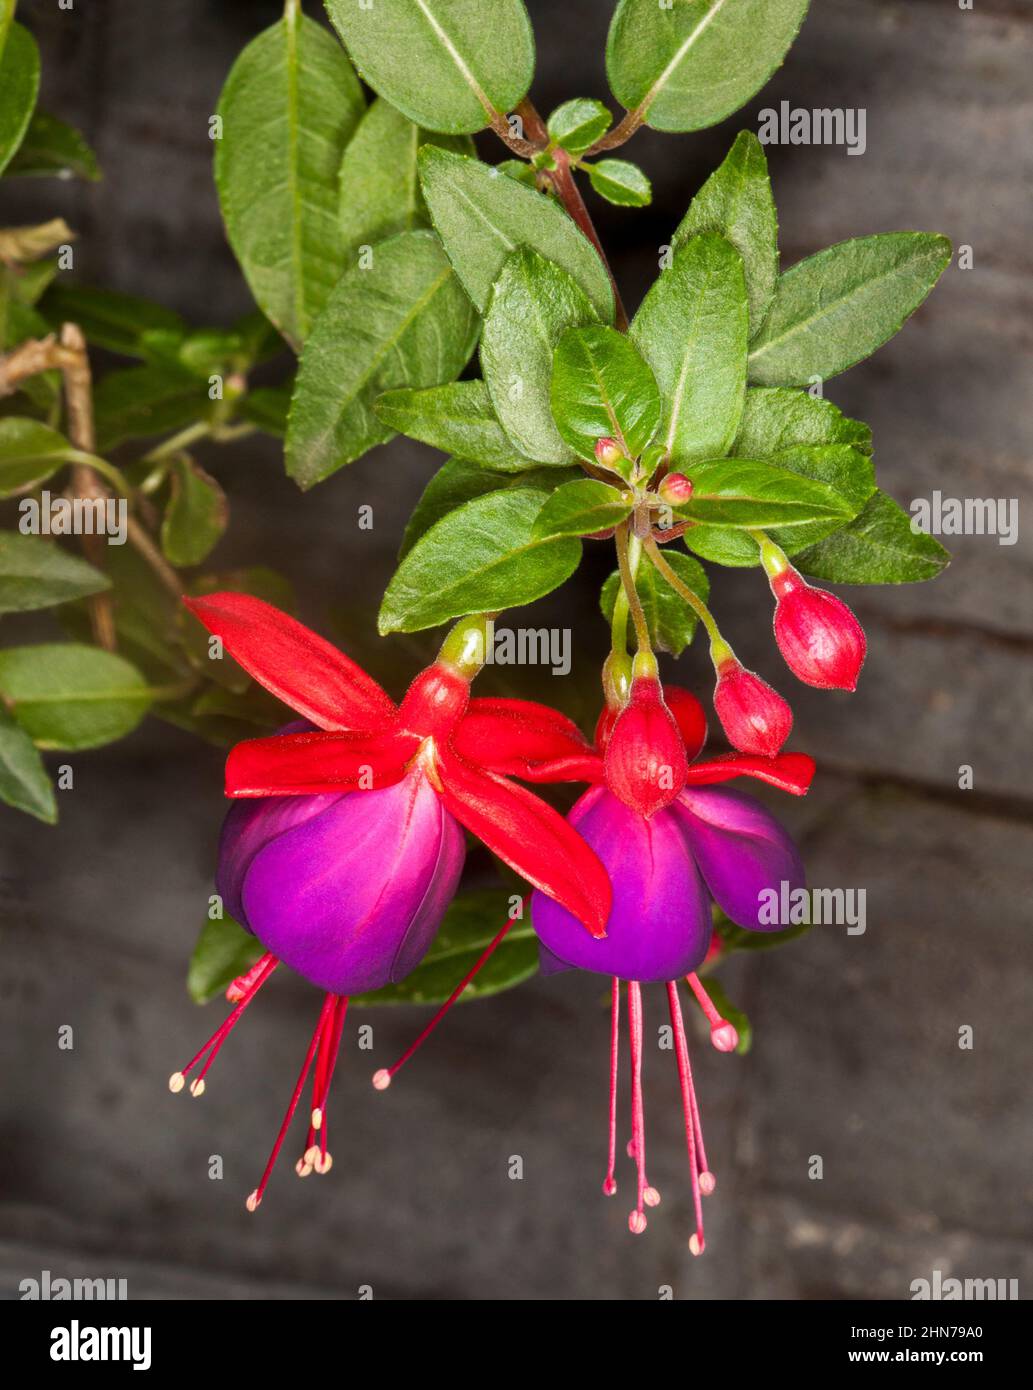 Stunning bright red and purple flowers of Fuchsia hanging from a cluster of emerald green leaves against a dark brown background Stock Photo